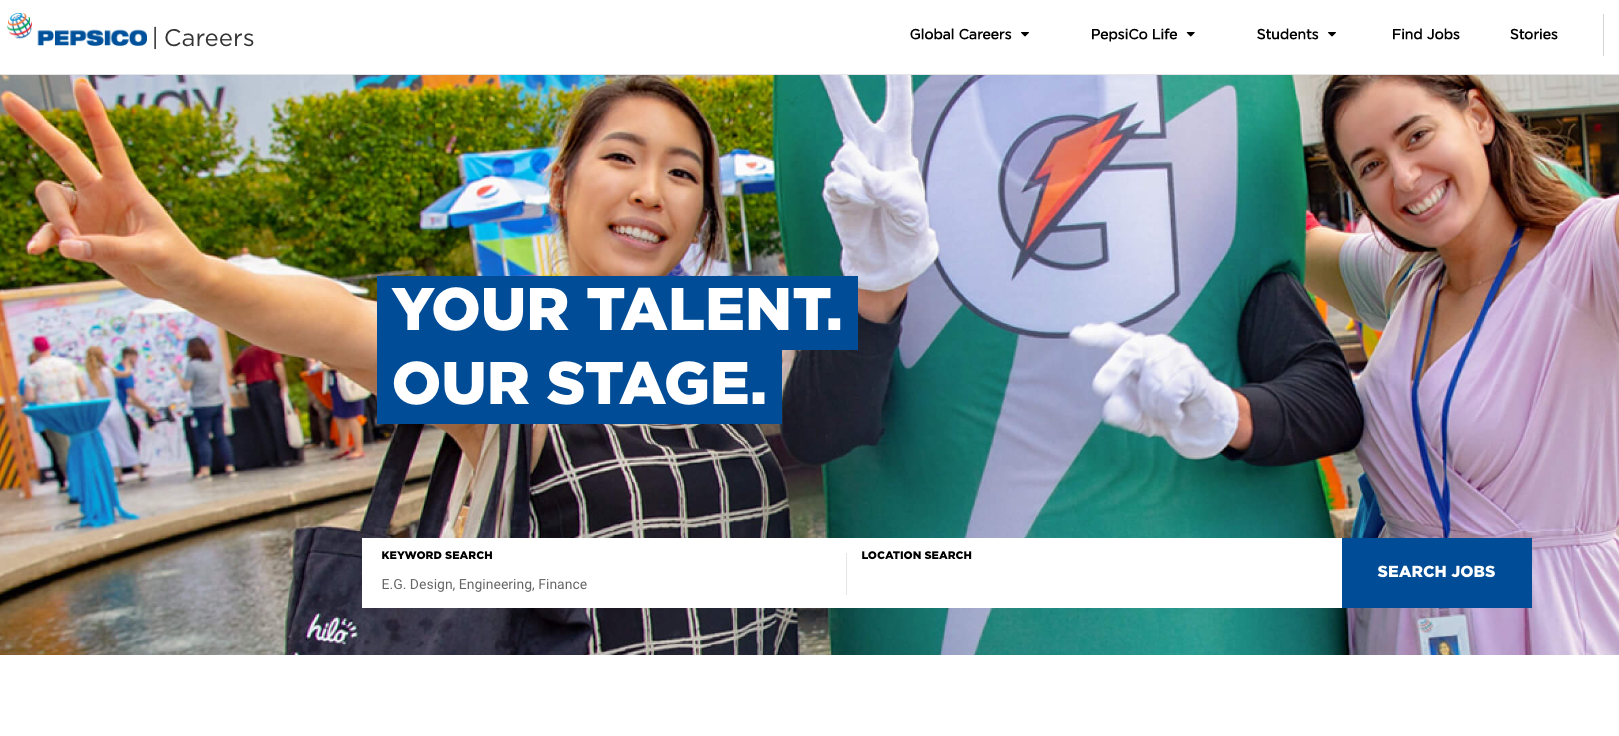 PepsiCo Careers official site